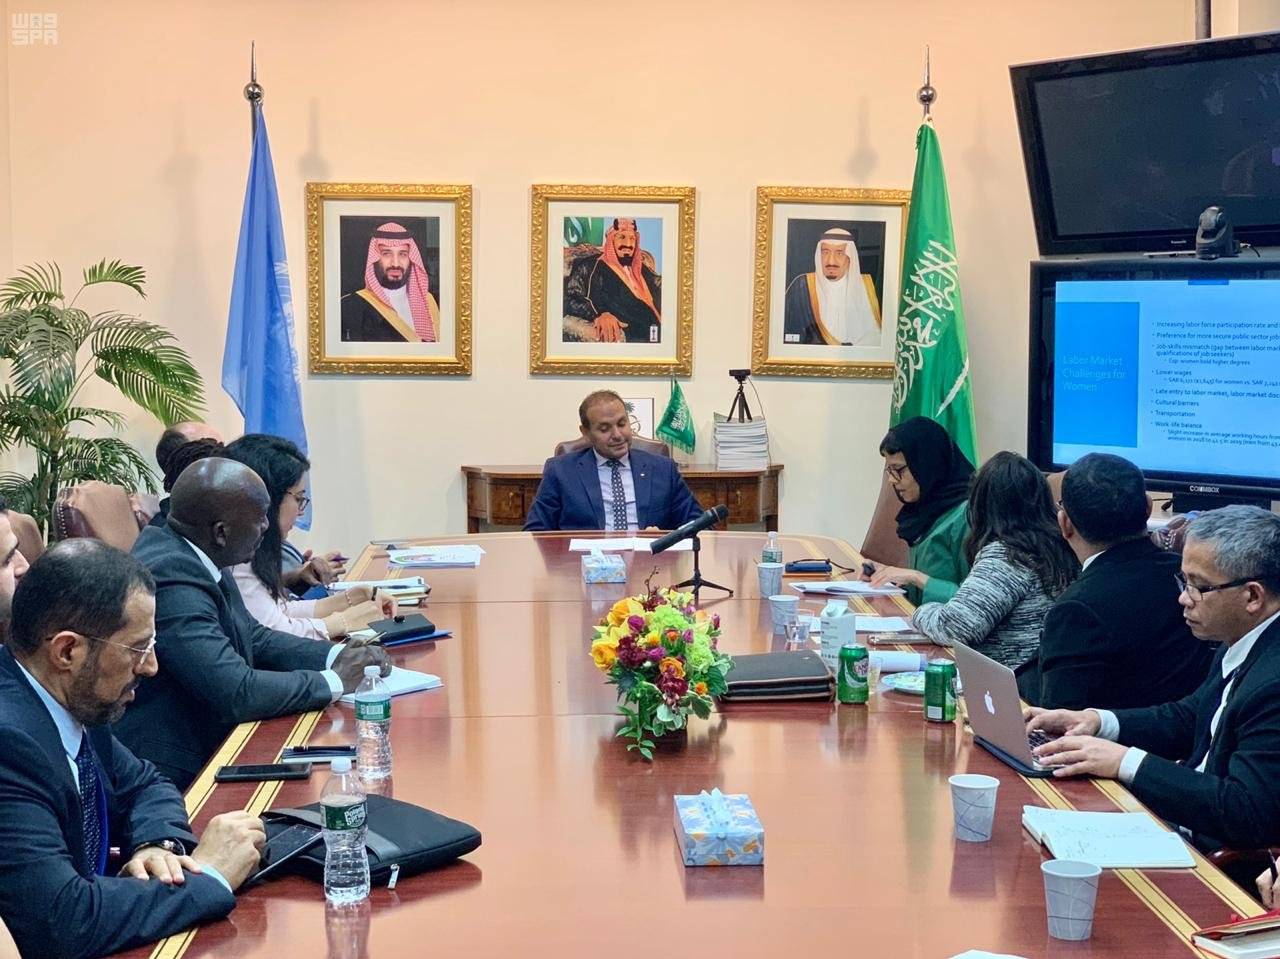 The Permanent Delegation of the Kingdom of Saudi Arabia to the United Nations held a seminar on the role of quality education in increasing the participation of women in the labor market.